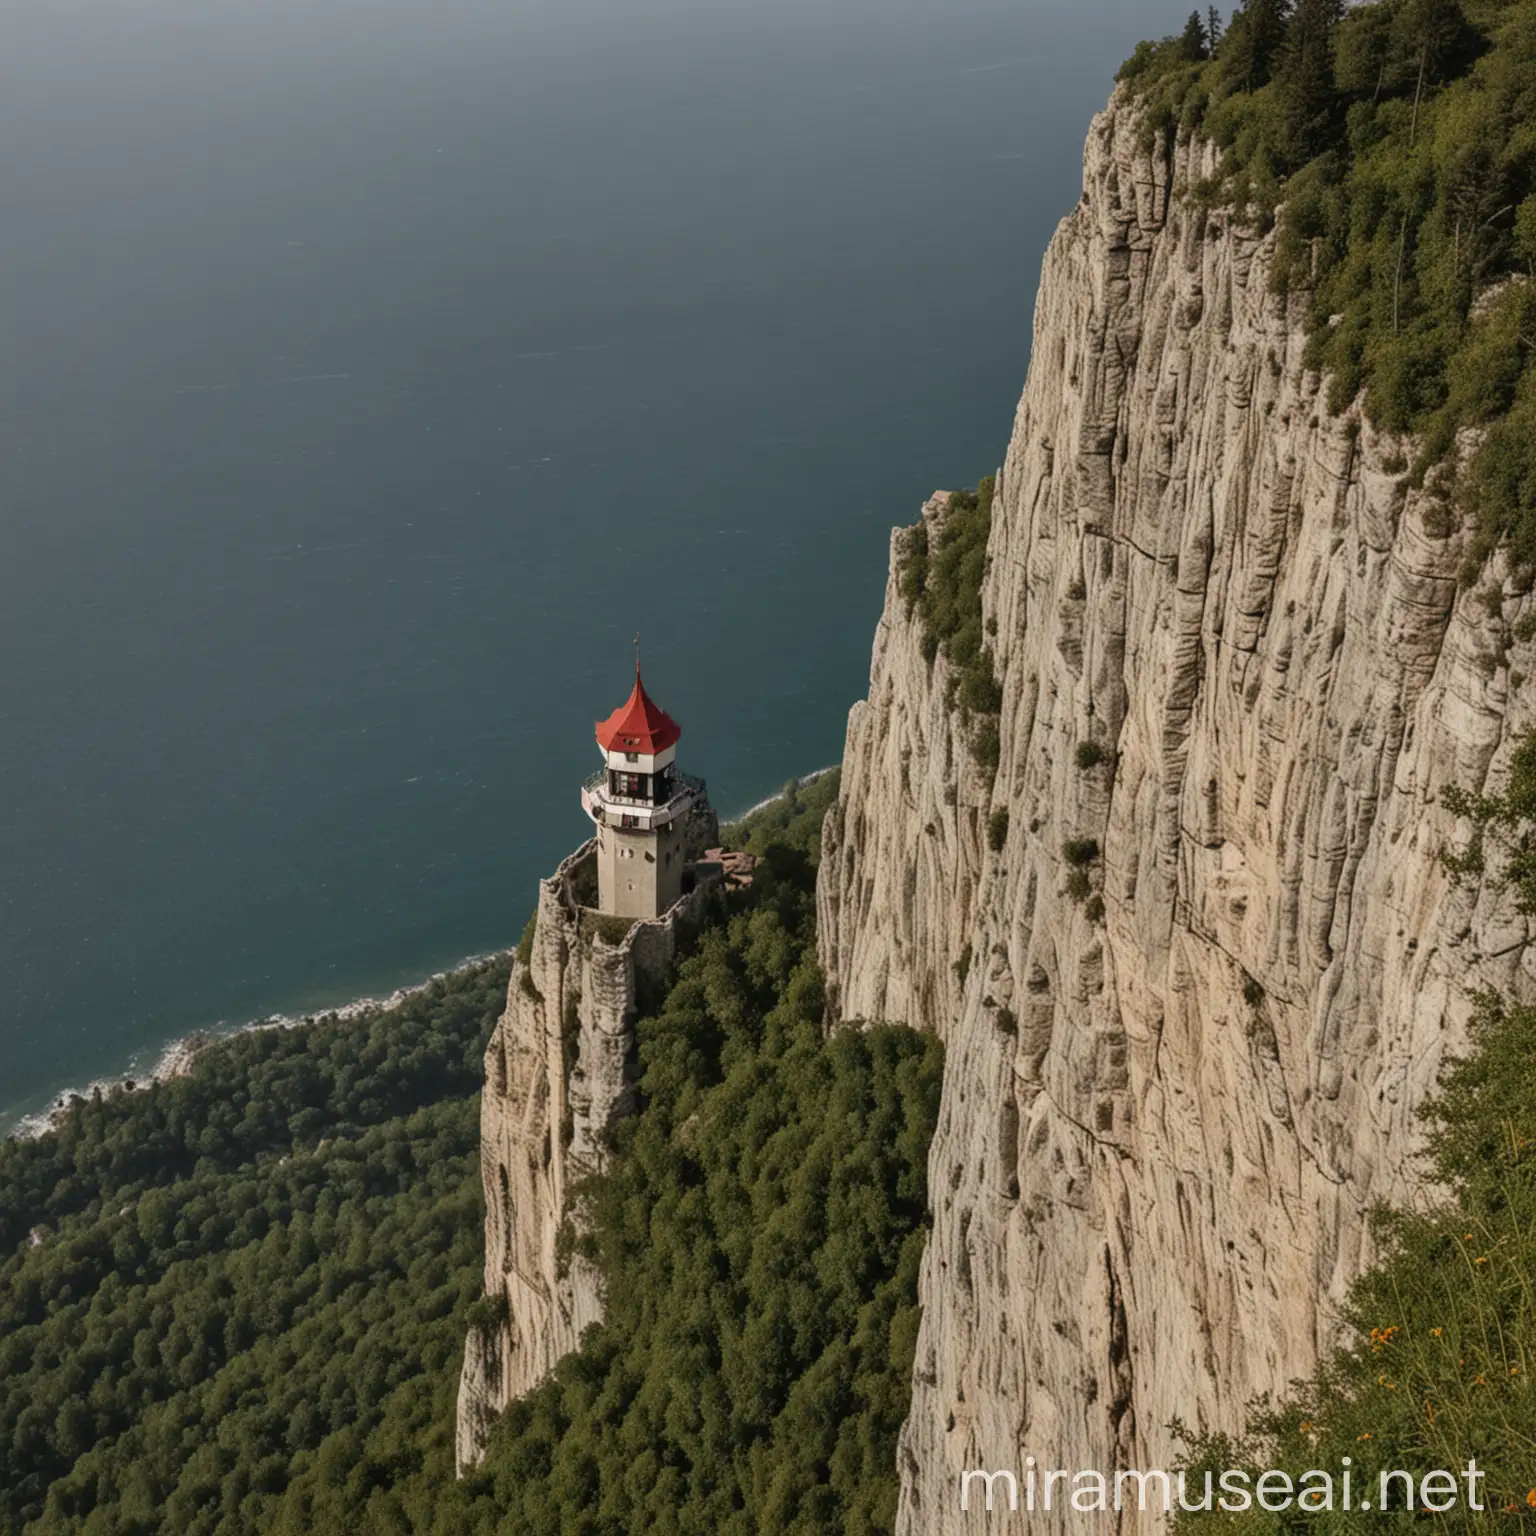 Bik Ben Tower on the edge of the cliff